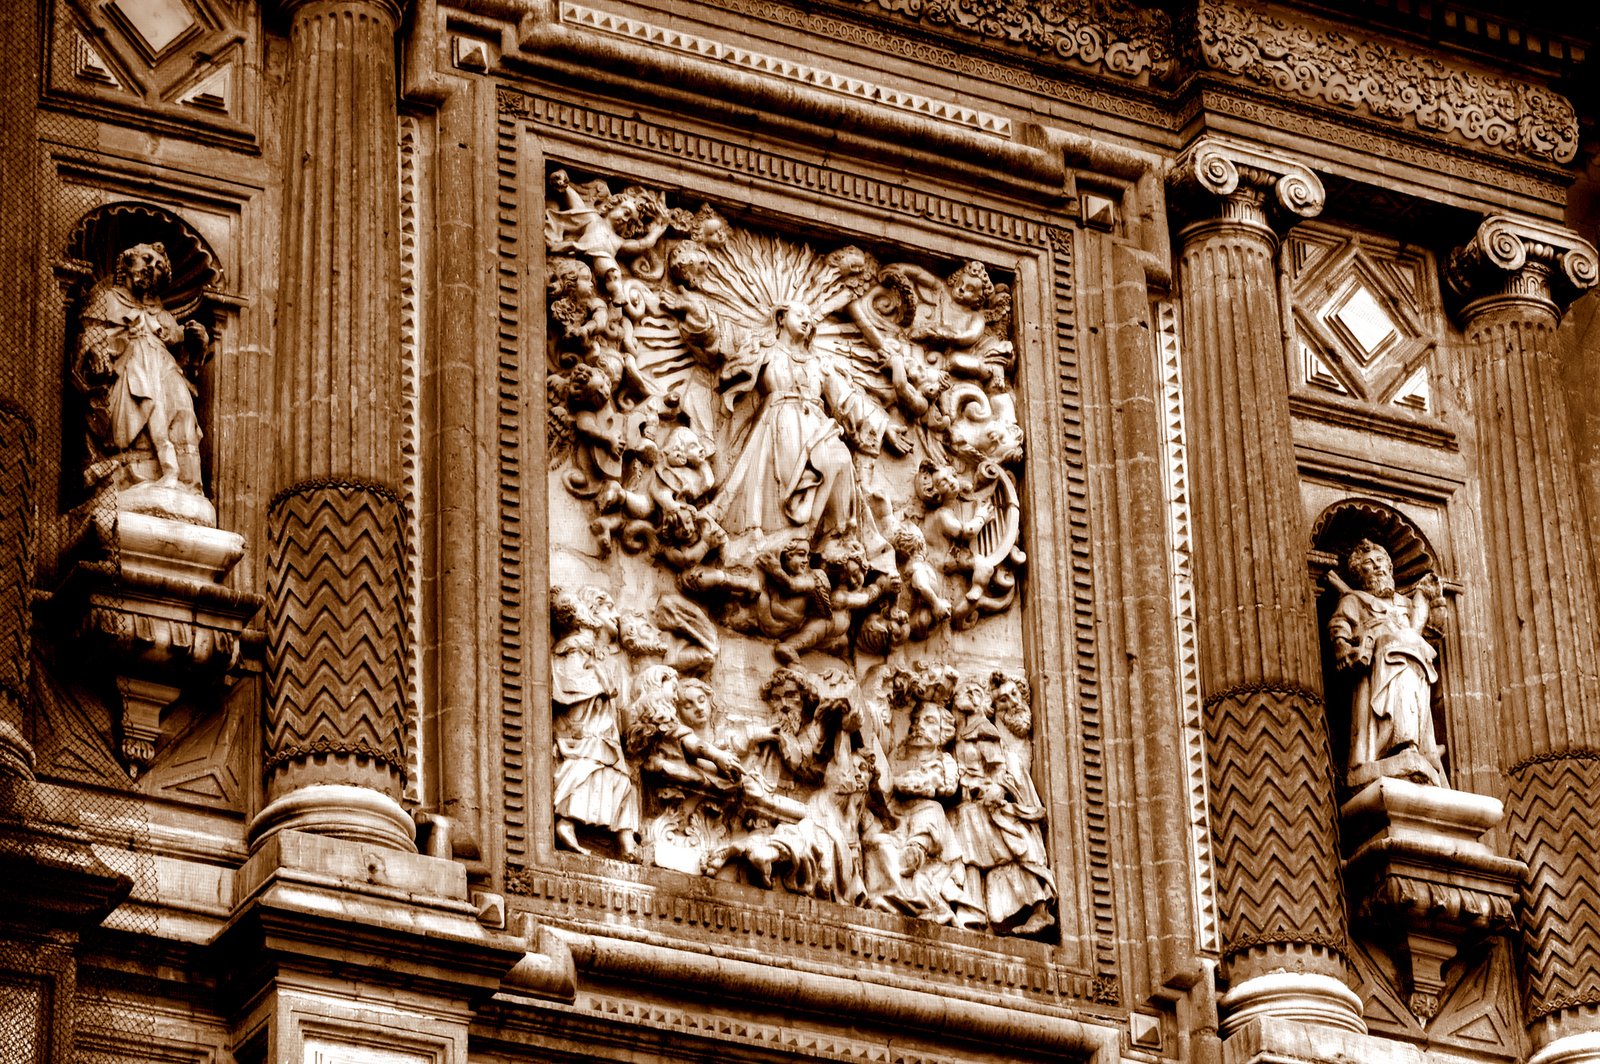 the large decorative panel on the side of a building